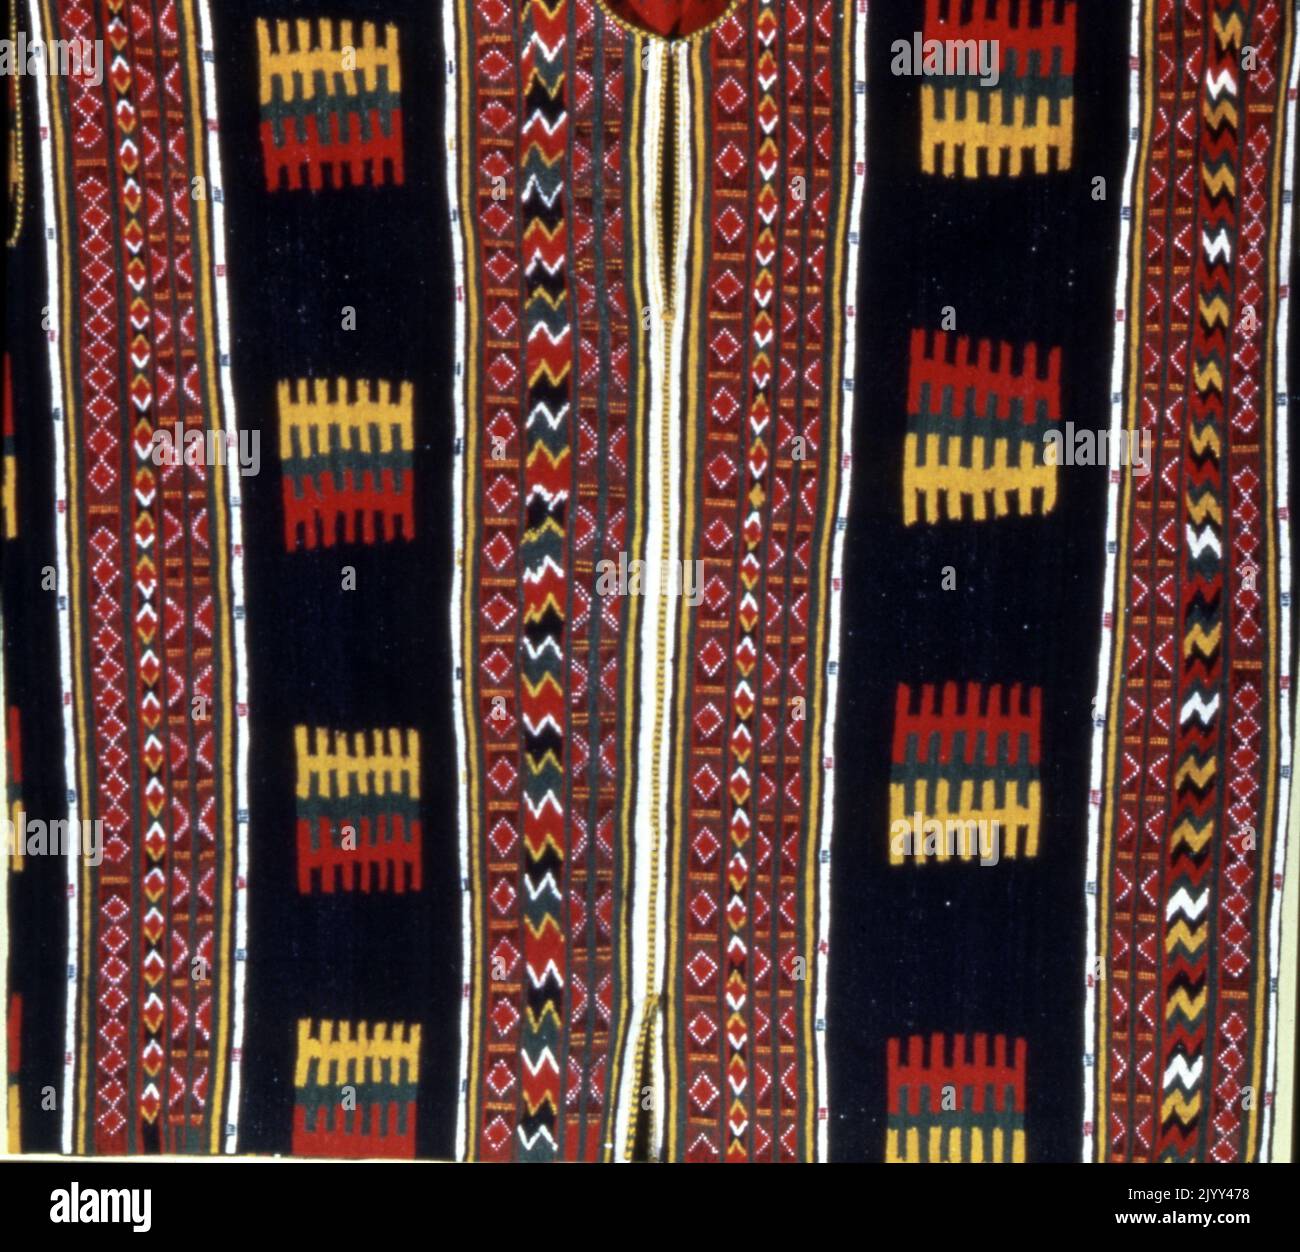 Woolen blanket woven by the Kabyle people, a Berber ethnic group in the north of Algeria 1933 Stock Photo